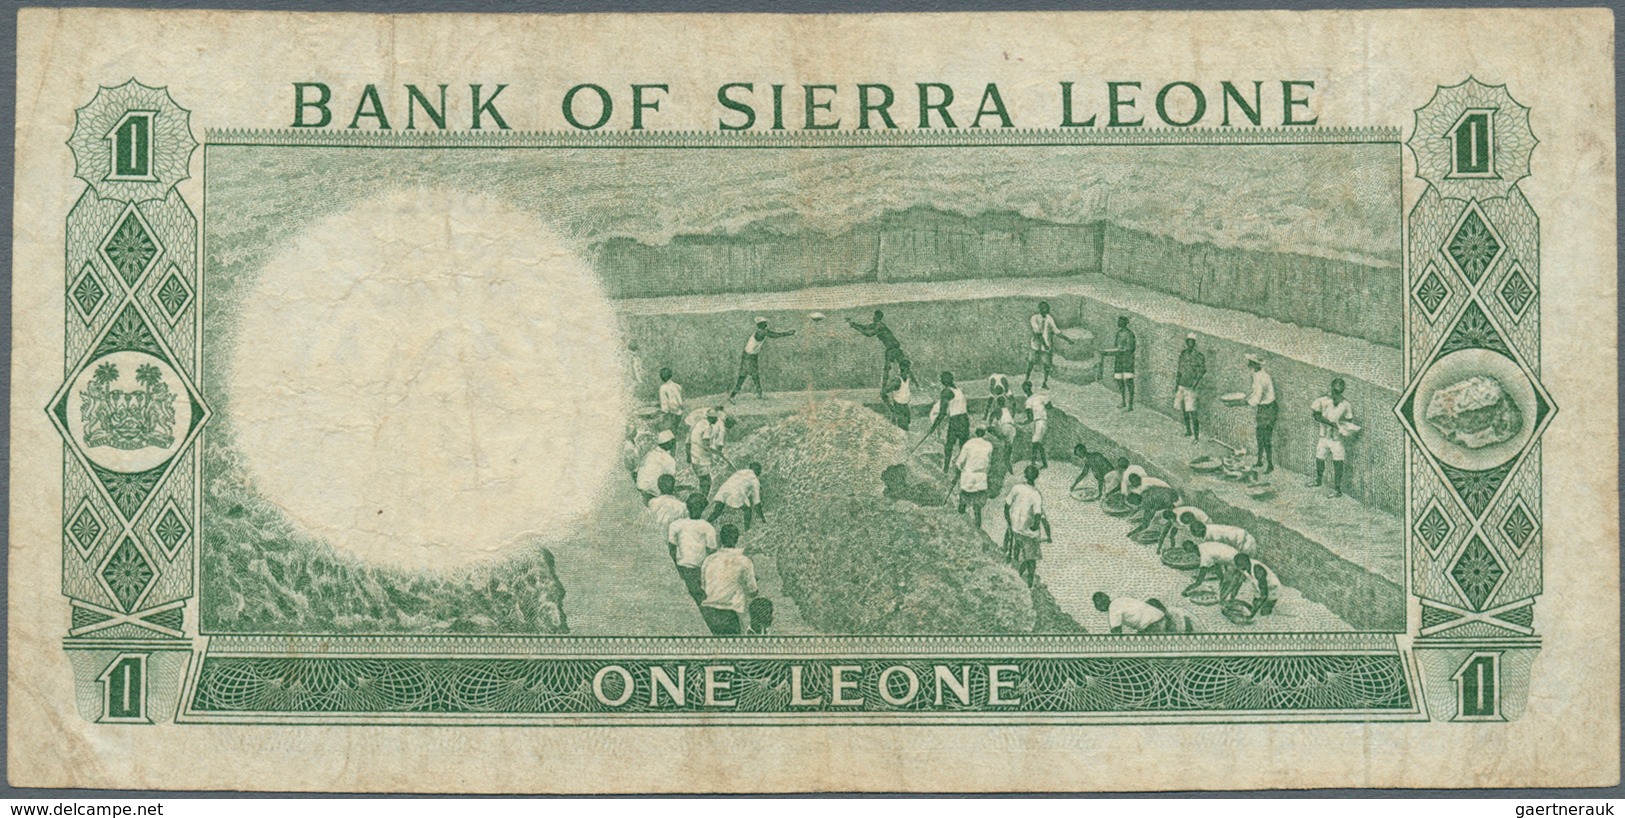 02360 Sierra Leone: 1 Leone ND P. 1 In Used Condition With Folds And Stain In Paper, Condiiton: F To F+. - Sierra Leone